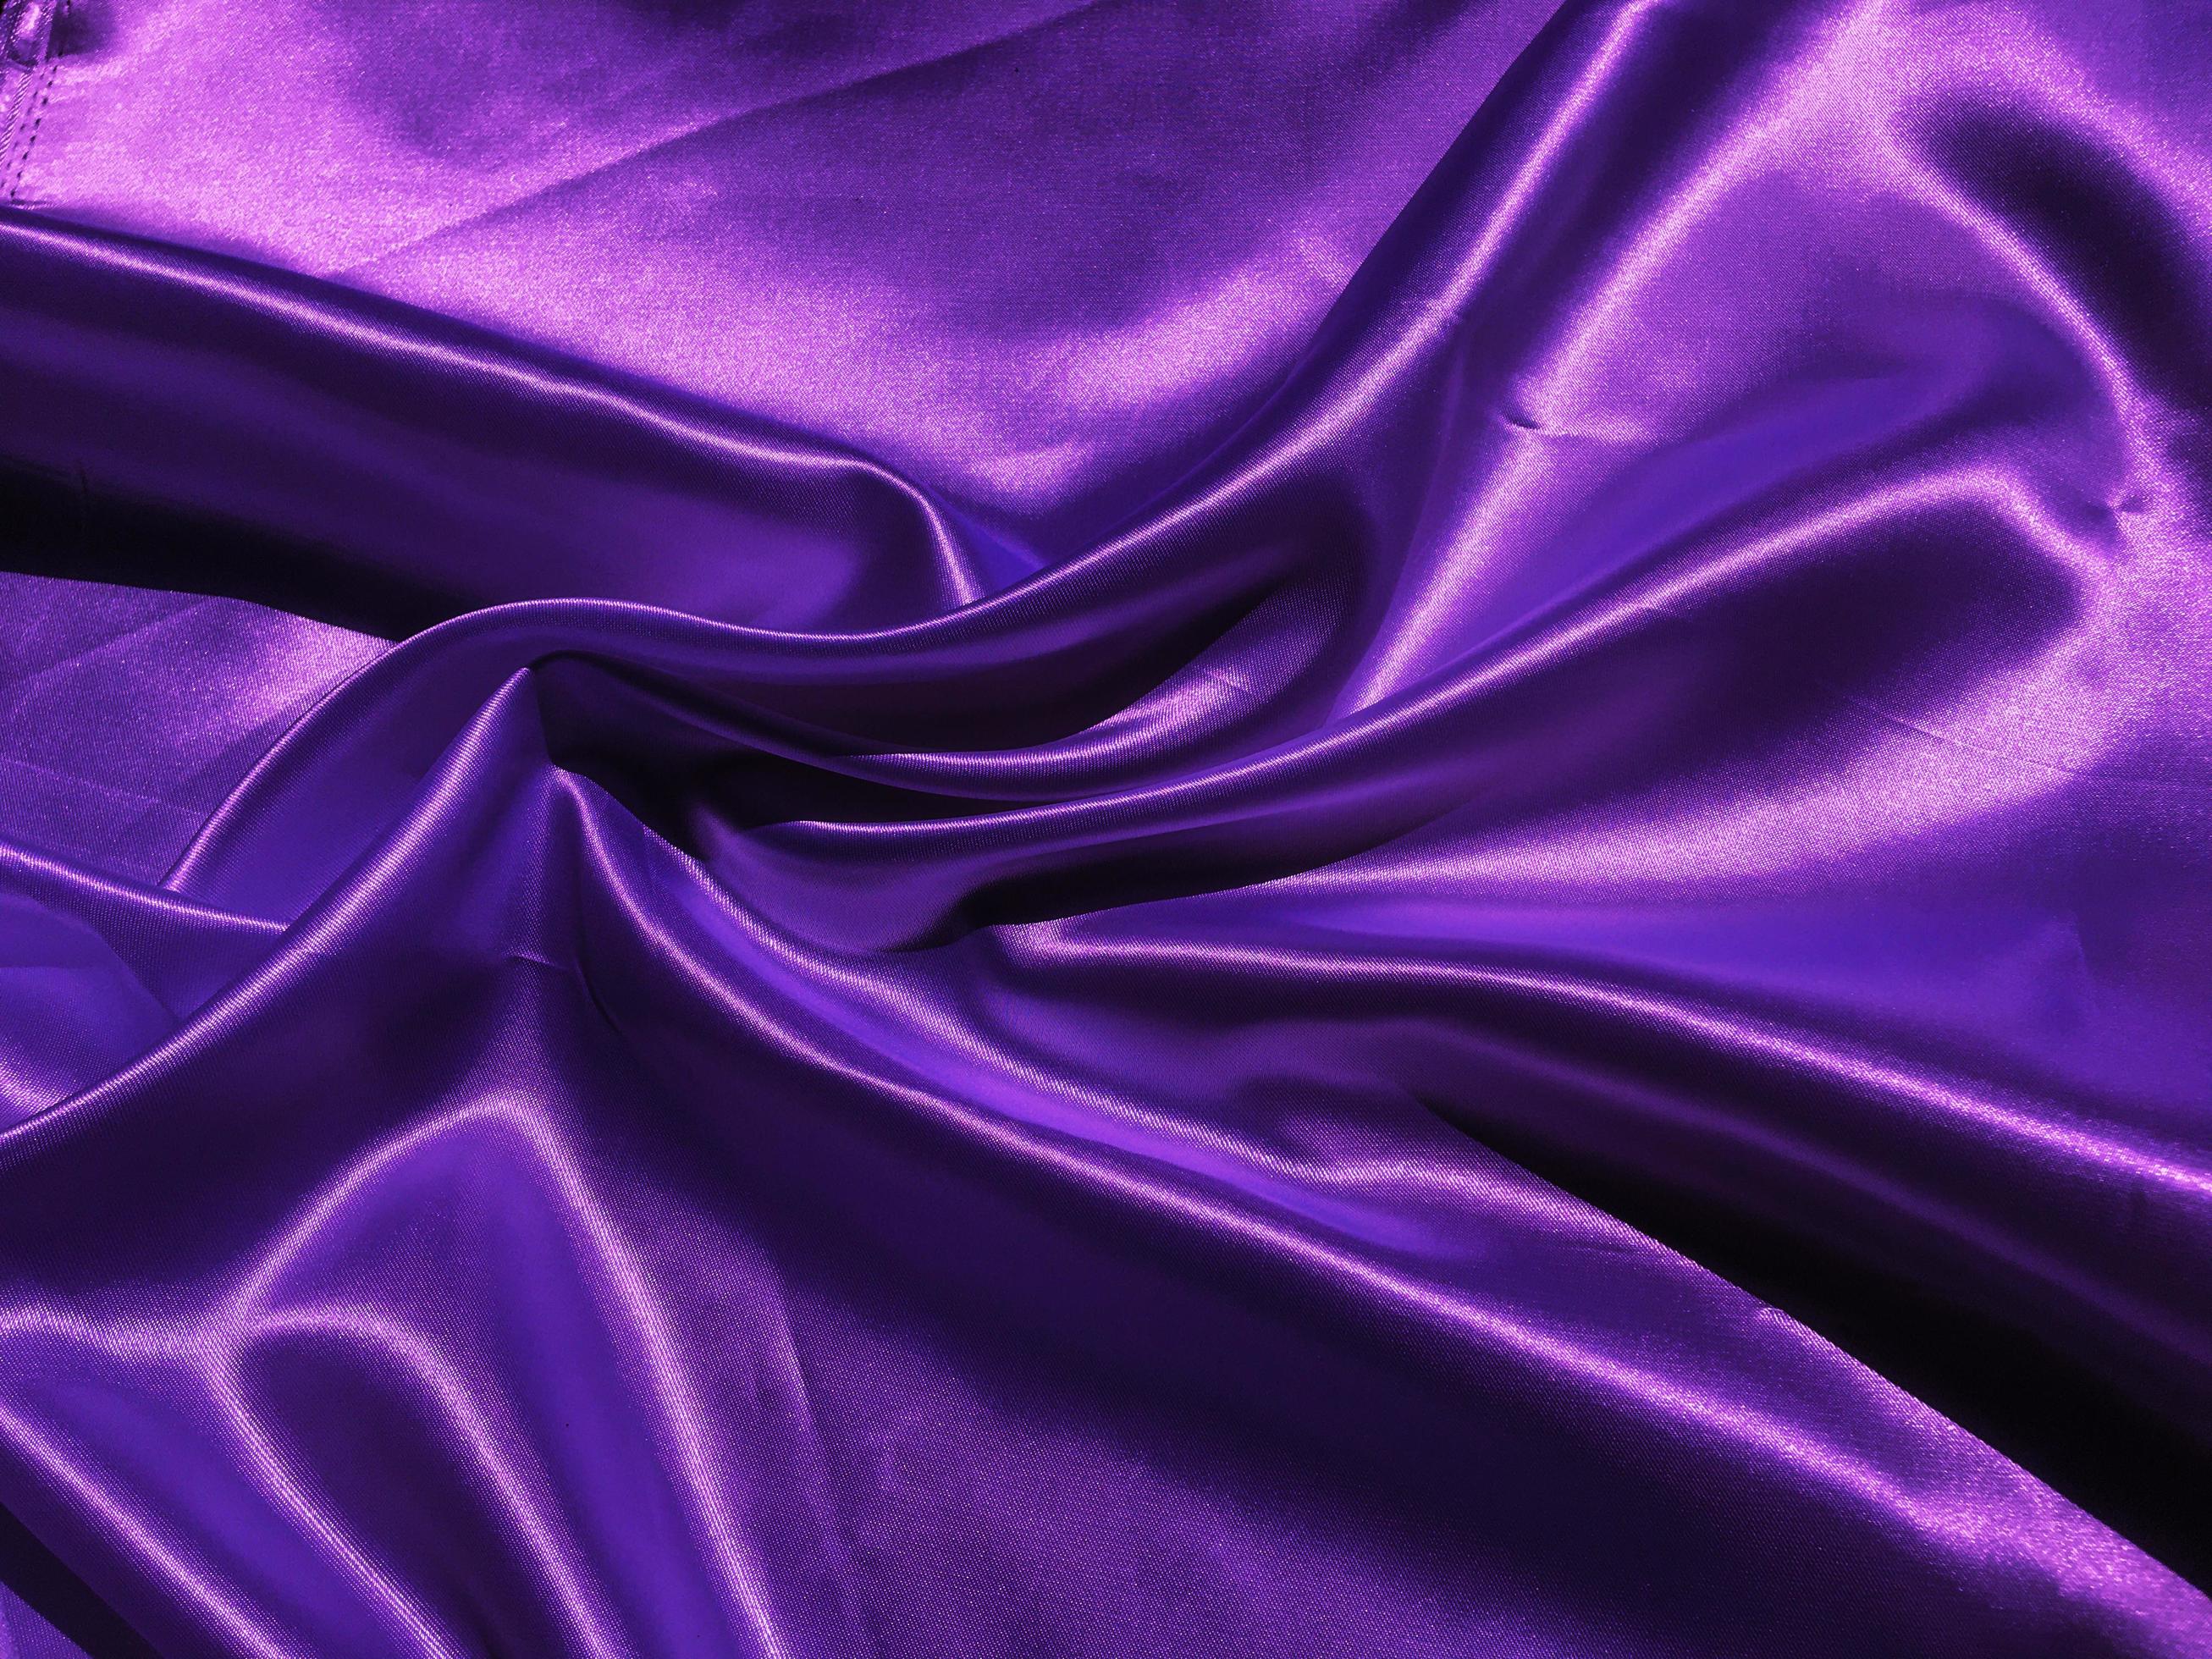 Closeup of purple satin or silk texture background. Copy space with elegant wallpaper design